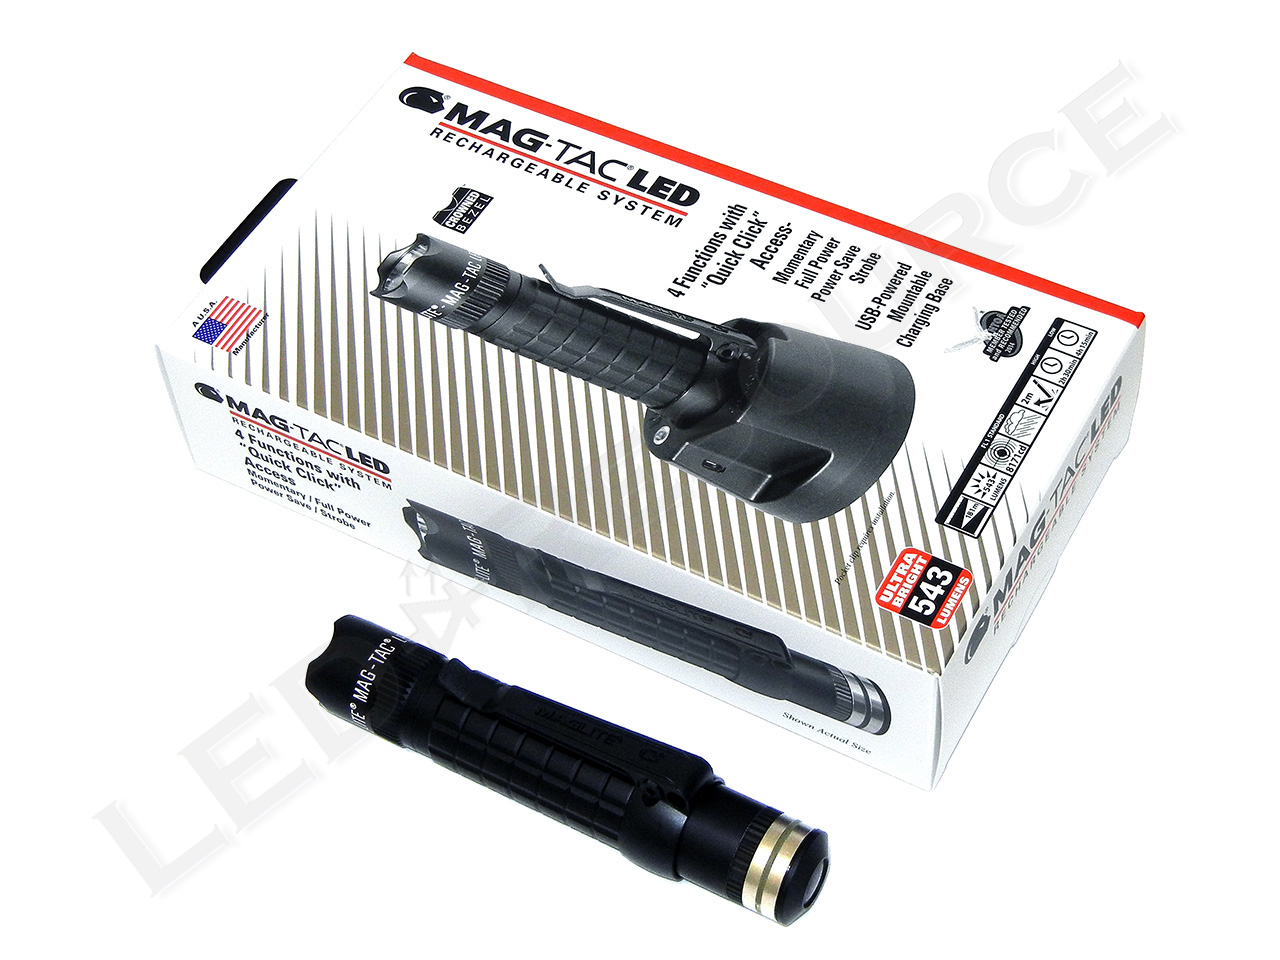 Maglite MAG-TAC LED Rechargeable System